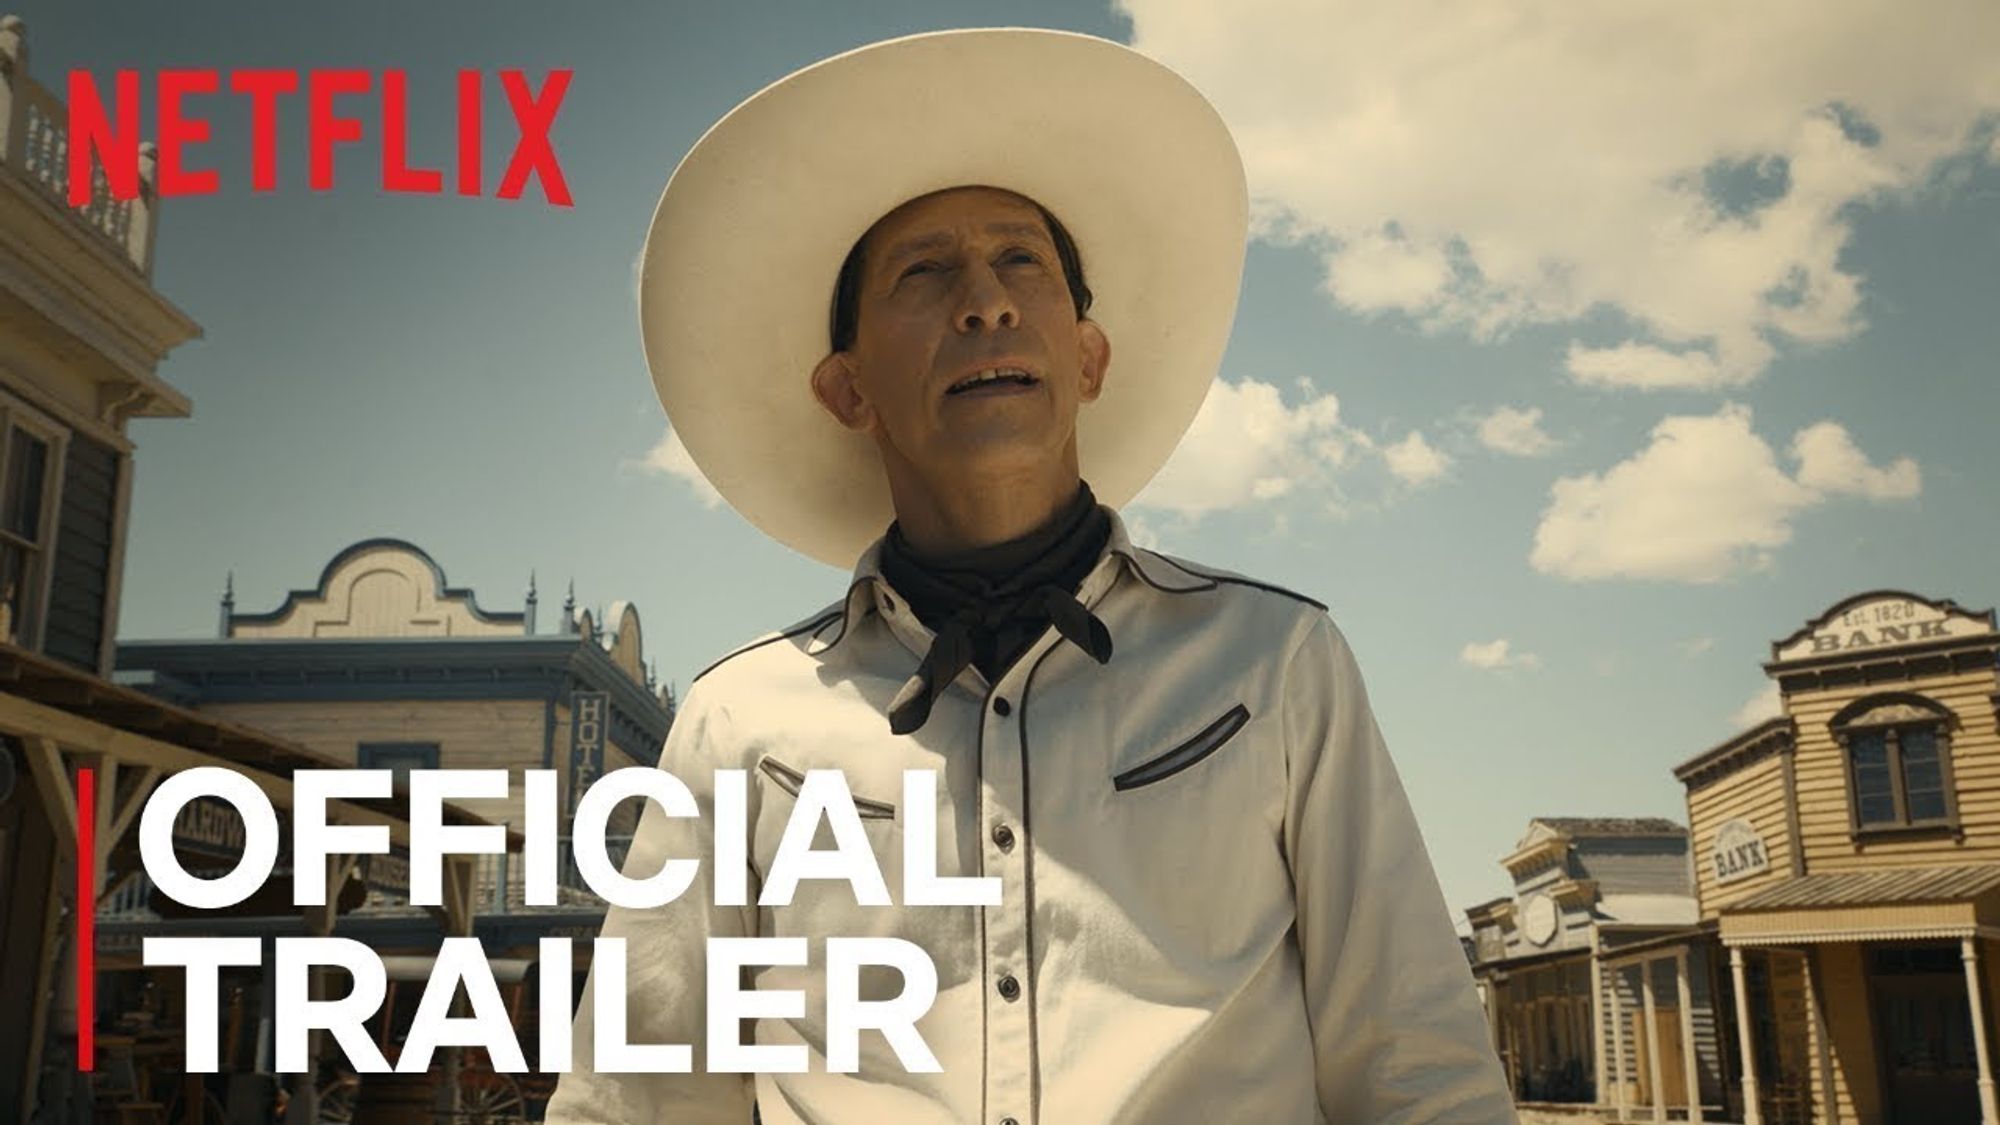 The Ballad of Buster Scruggs - “It's not uncommon for people to